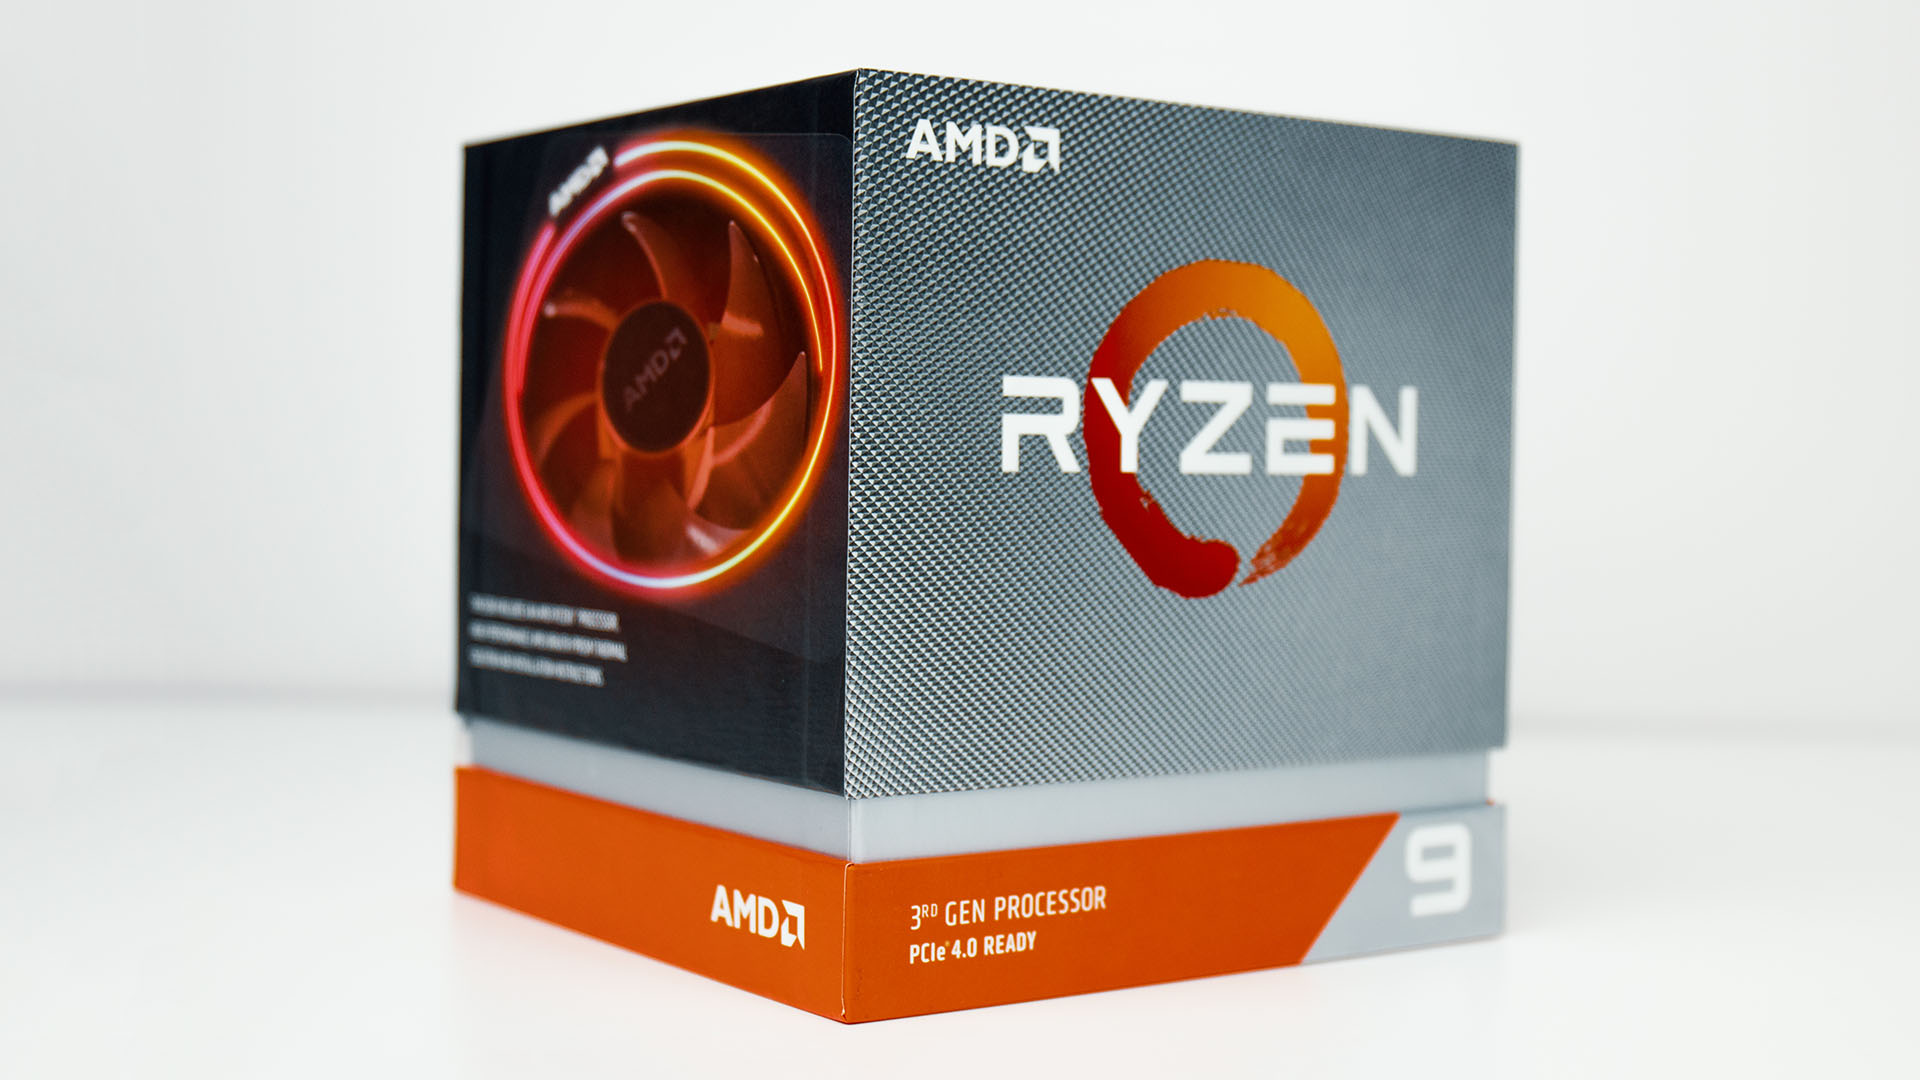 Sea Activate Arrow Less than 6% of AMD Ryzen 9 3900X CPUs capable of advertised 4.6GHz boost |  PCGamesN